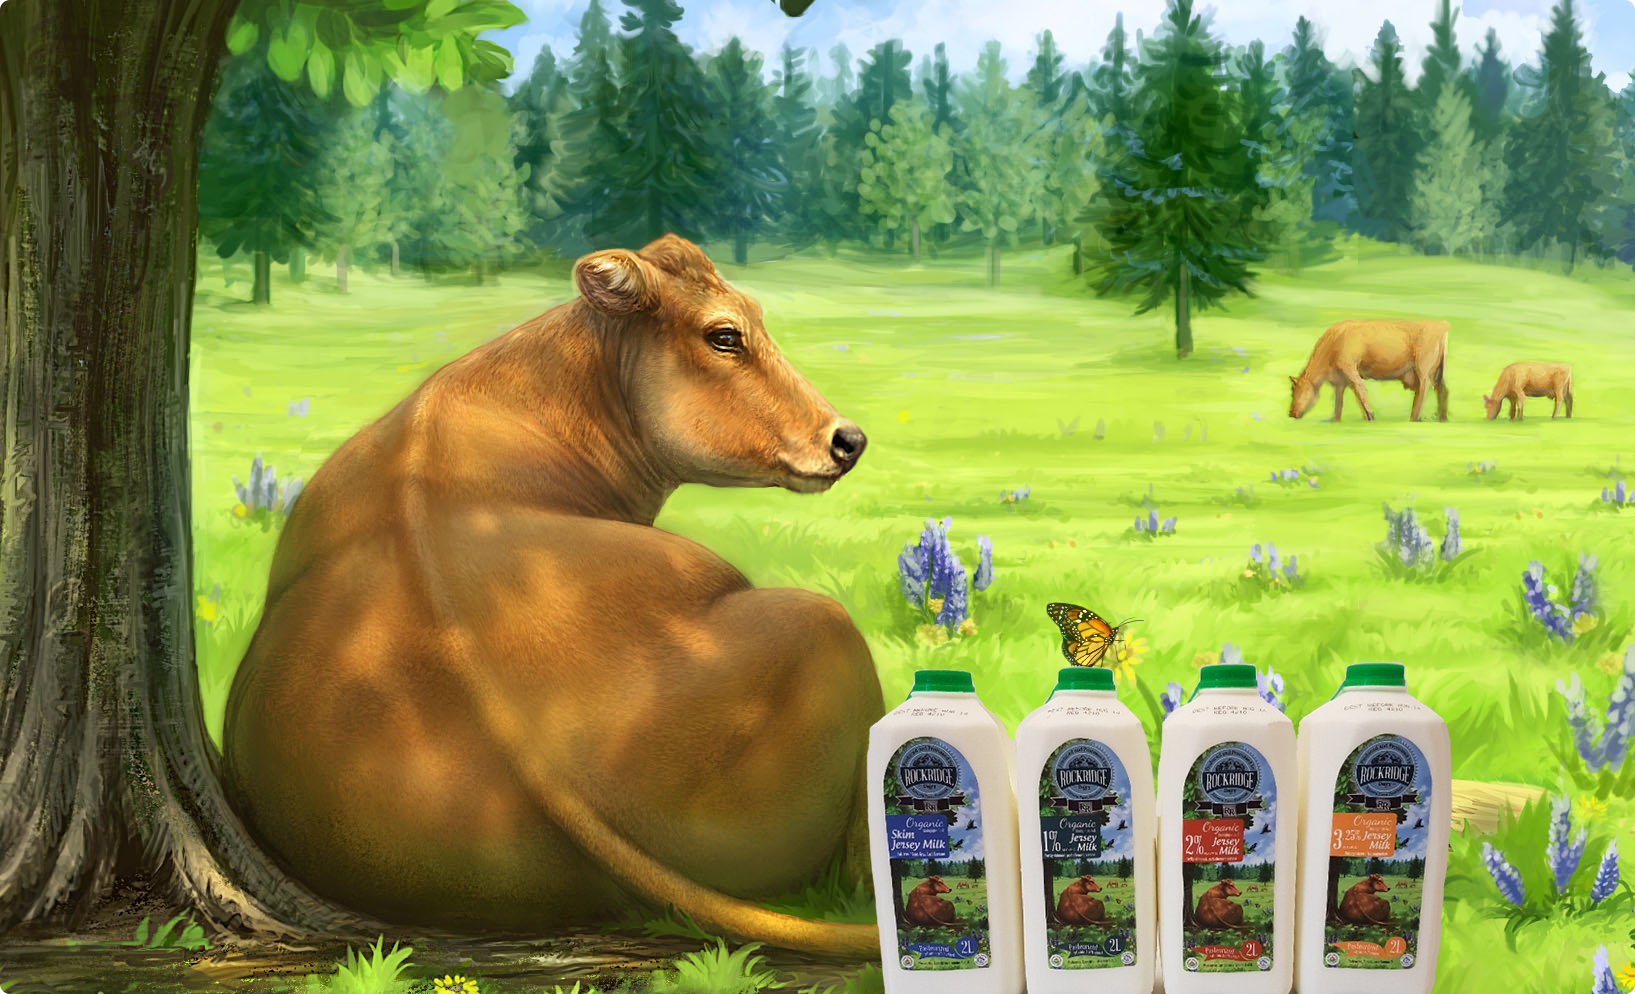 Cow_MilkCarton_Rounded_JerseyCows_edited